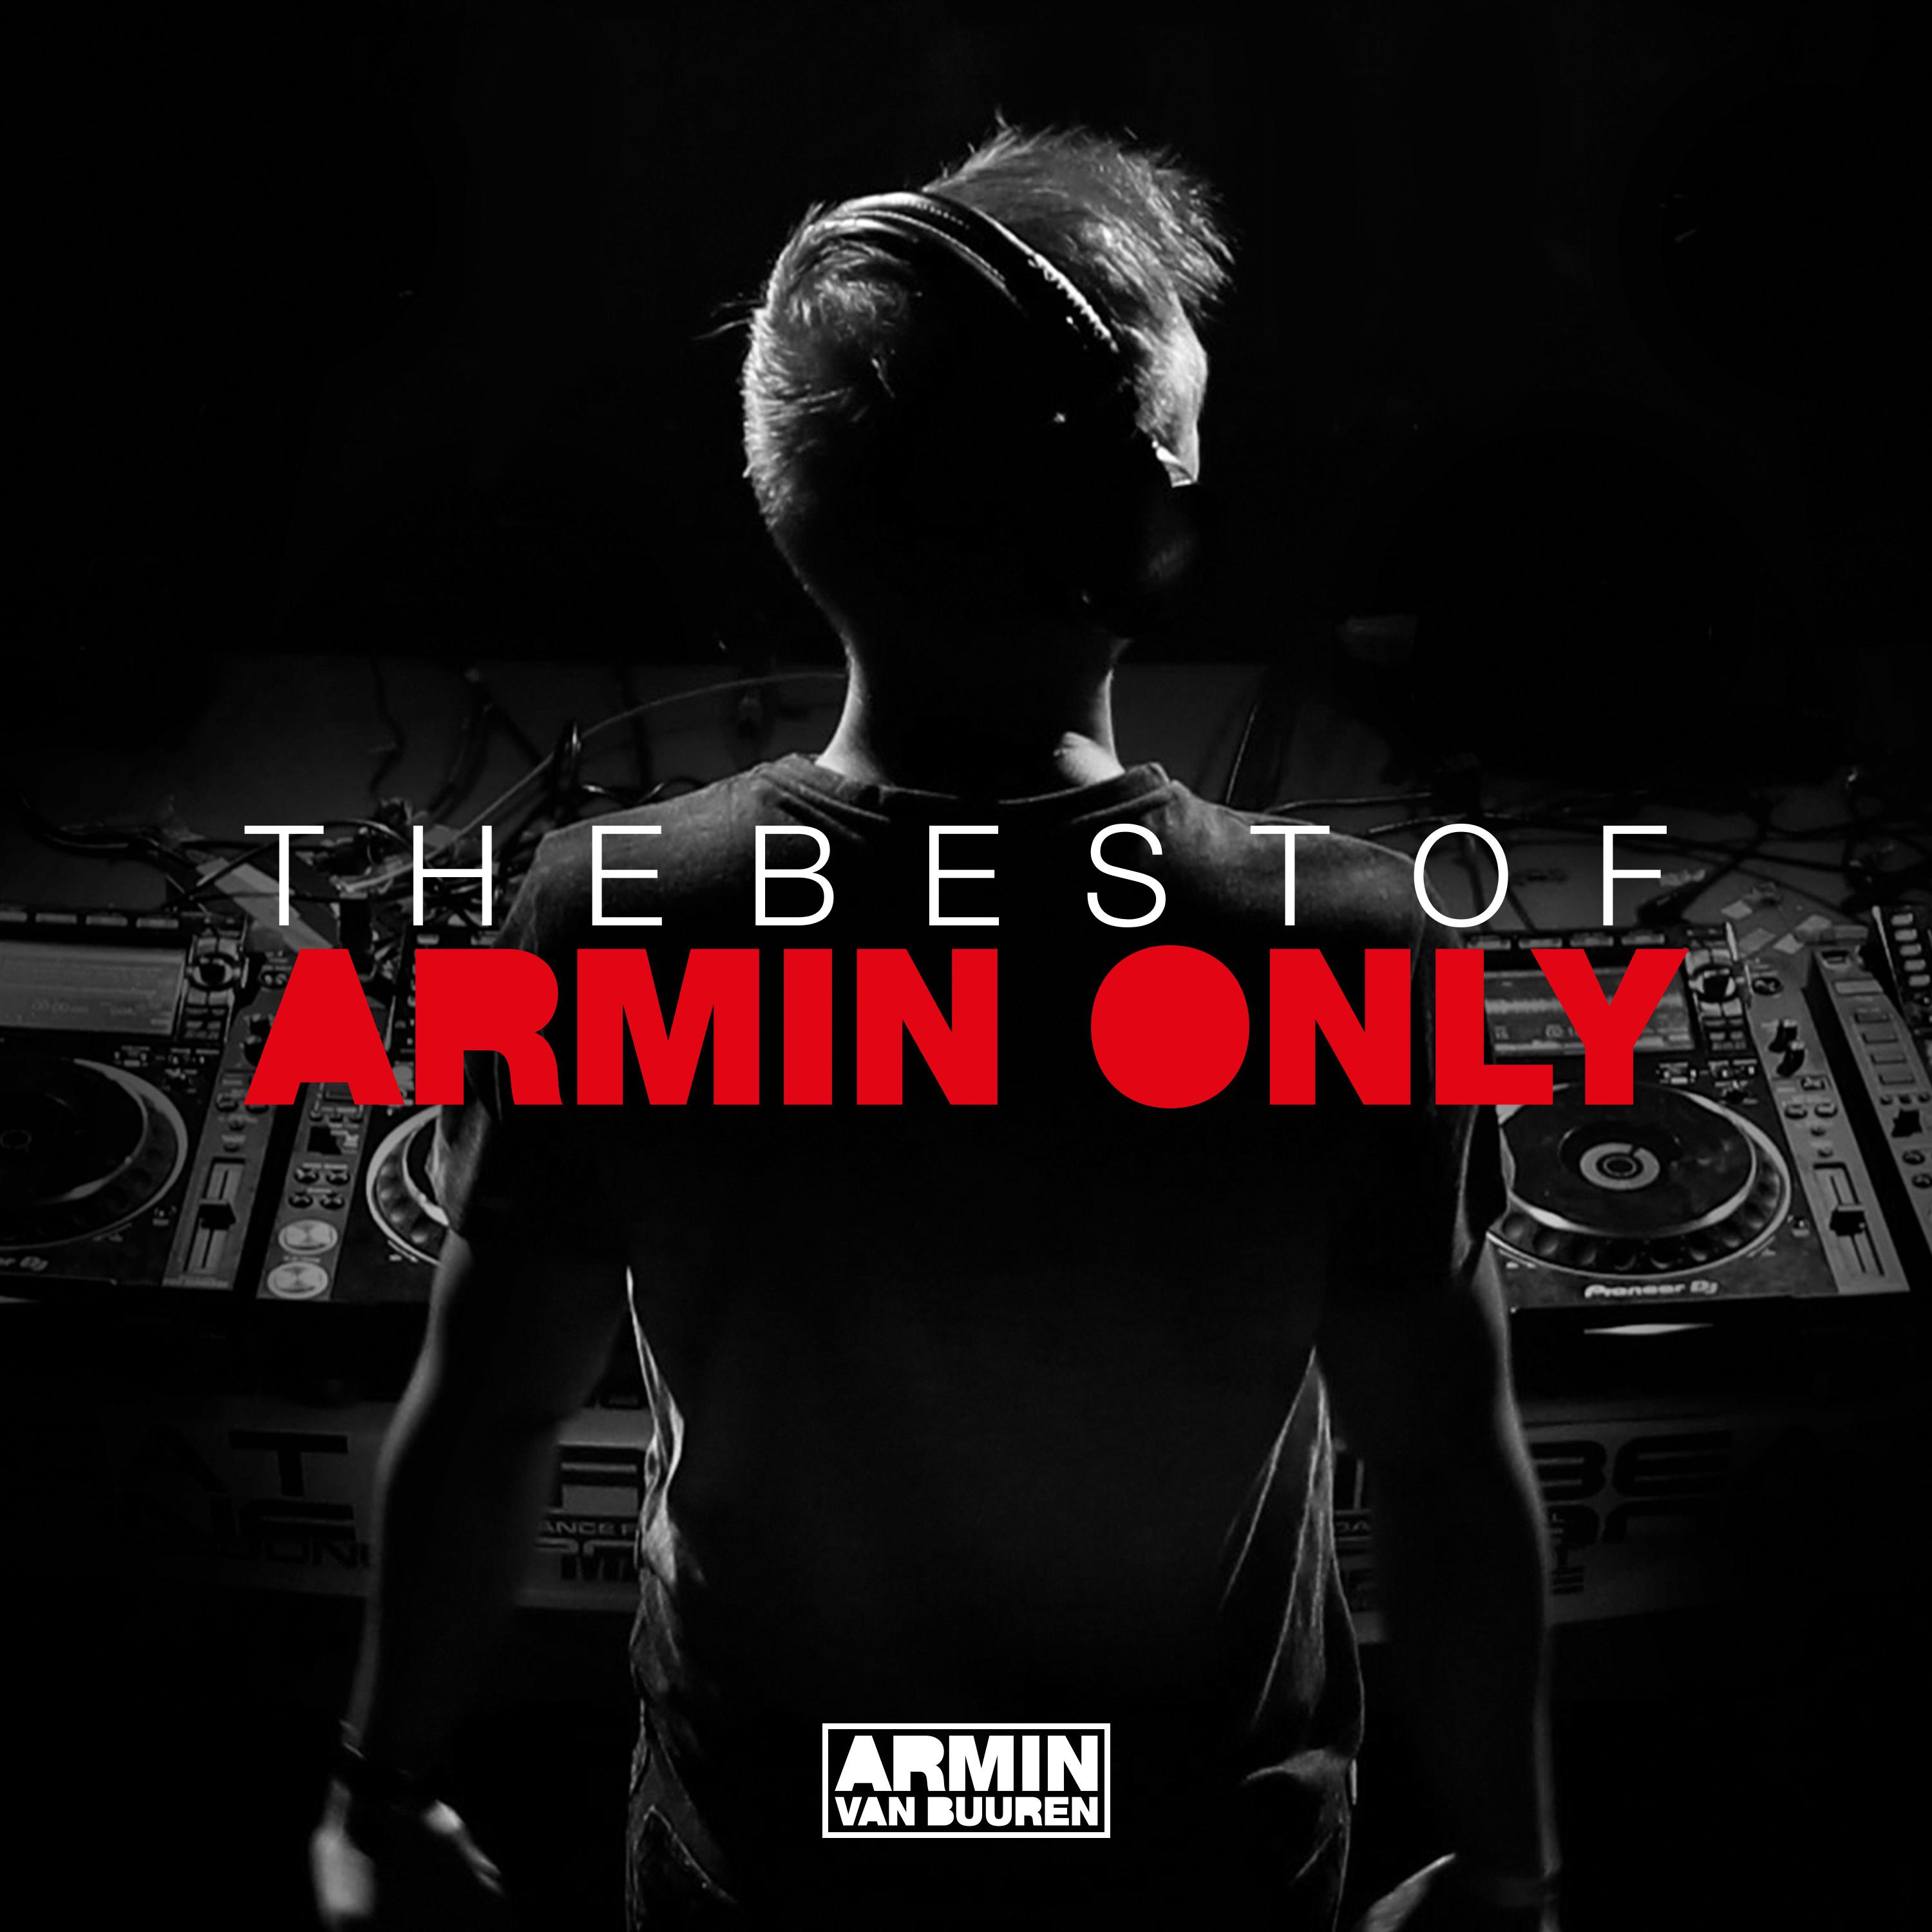 Overture (The Best Of Armin Only) (II. Mirage)